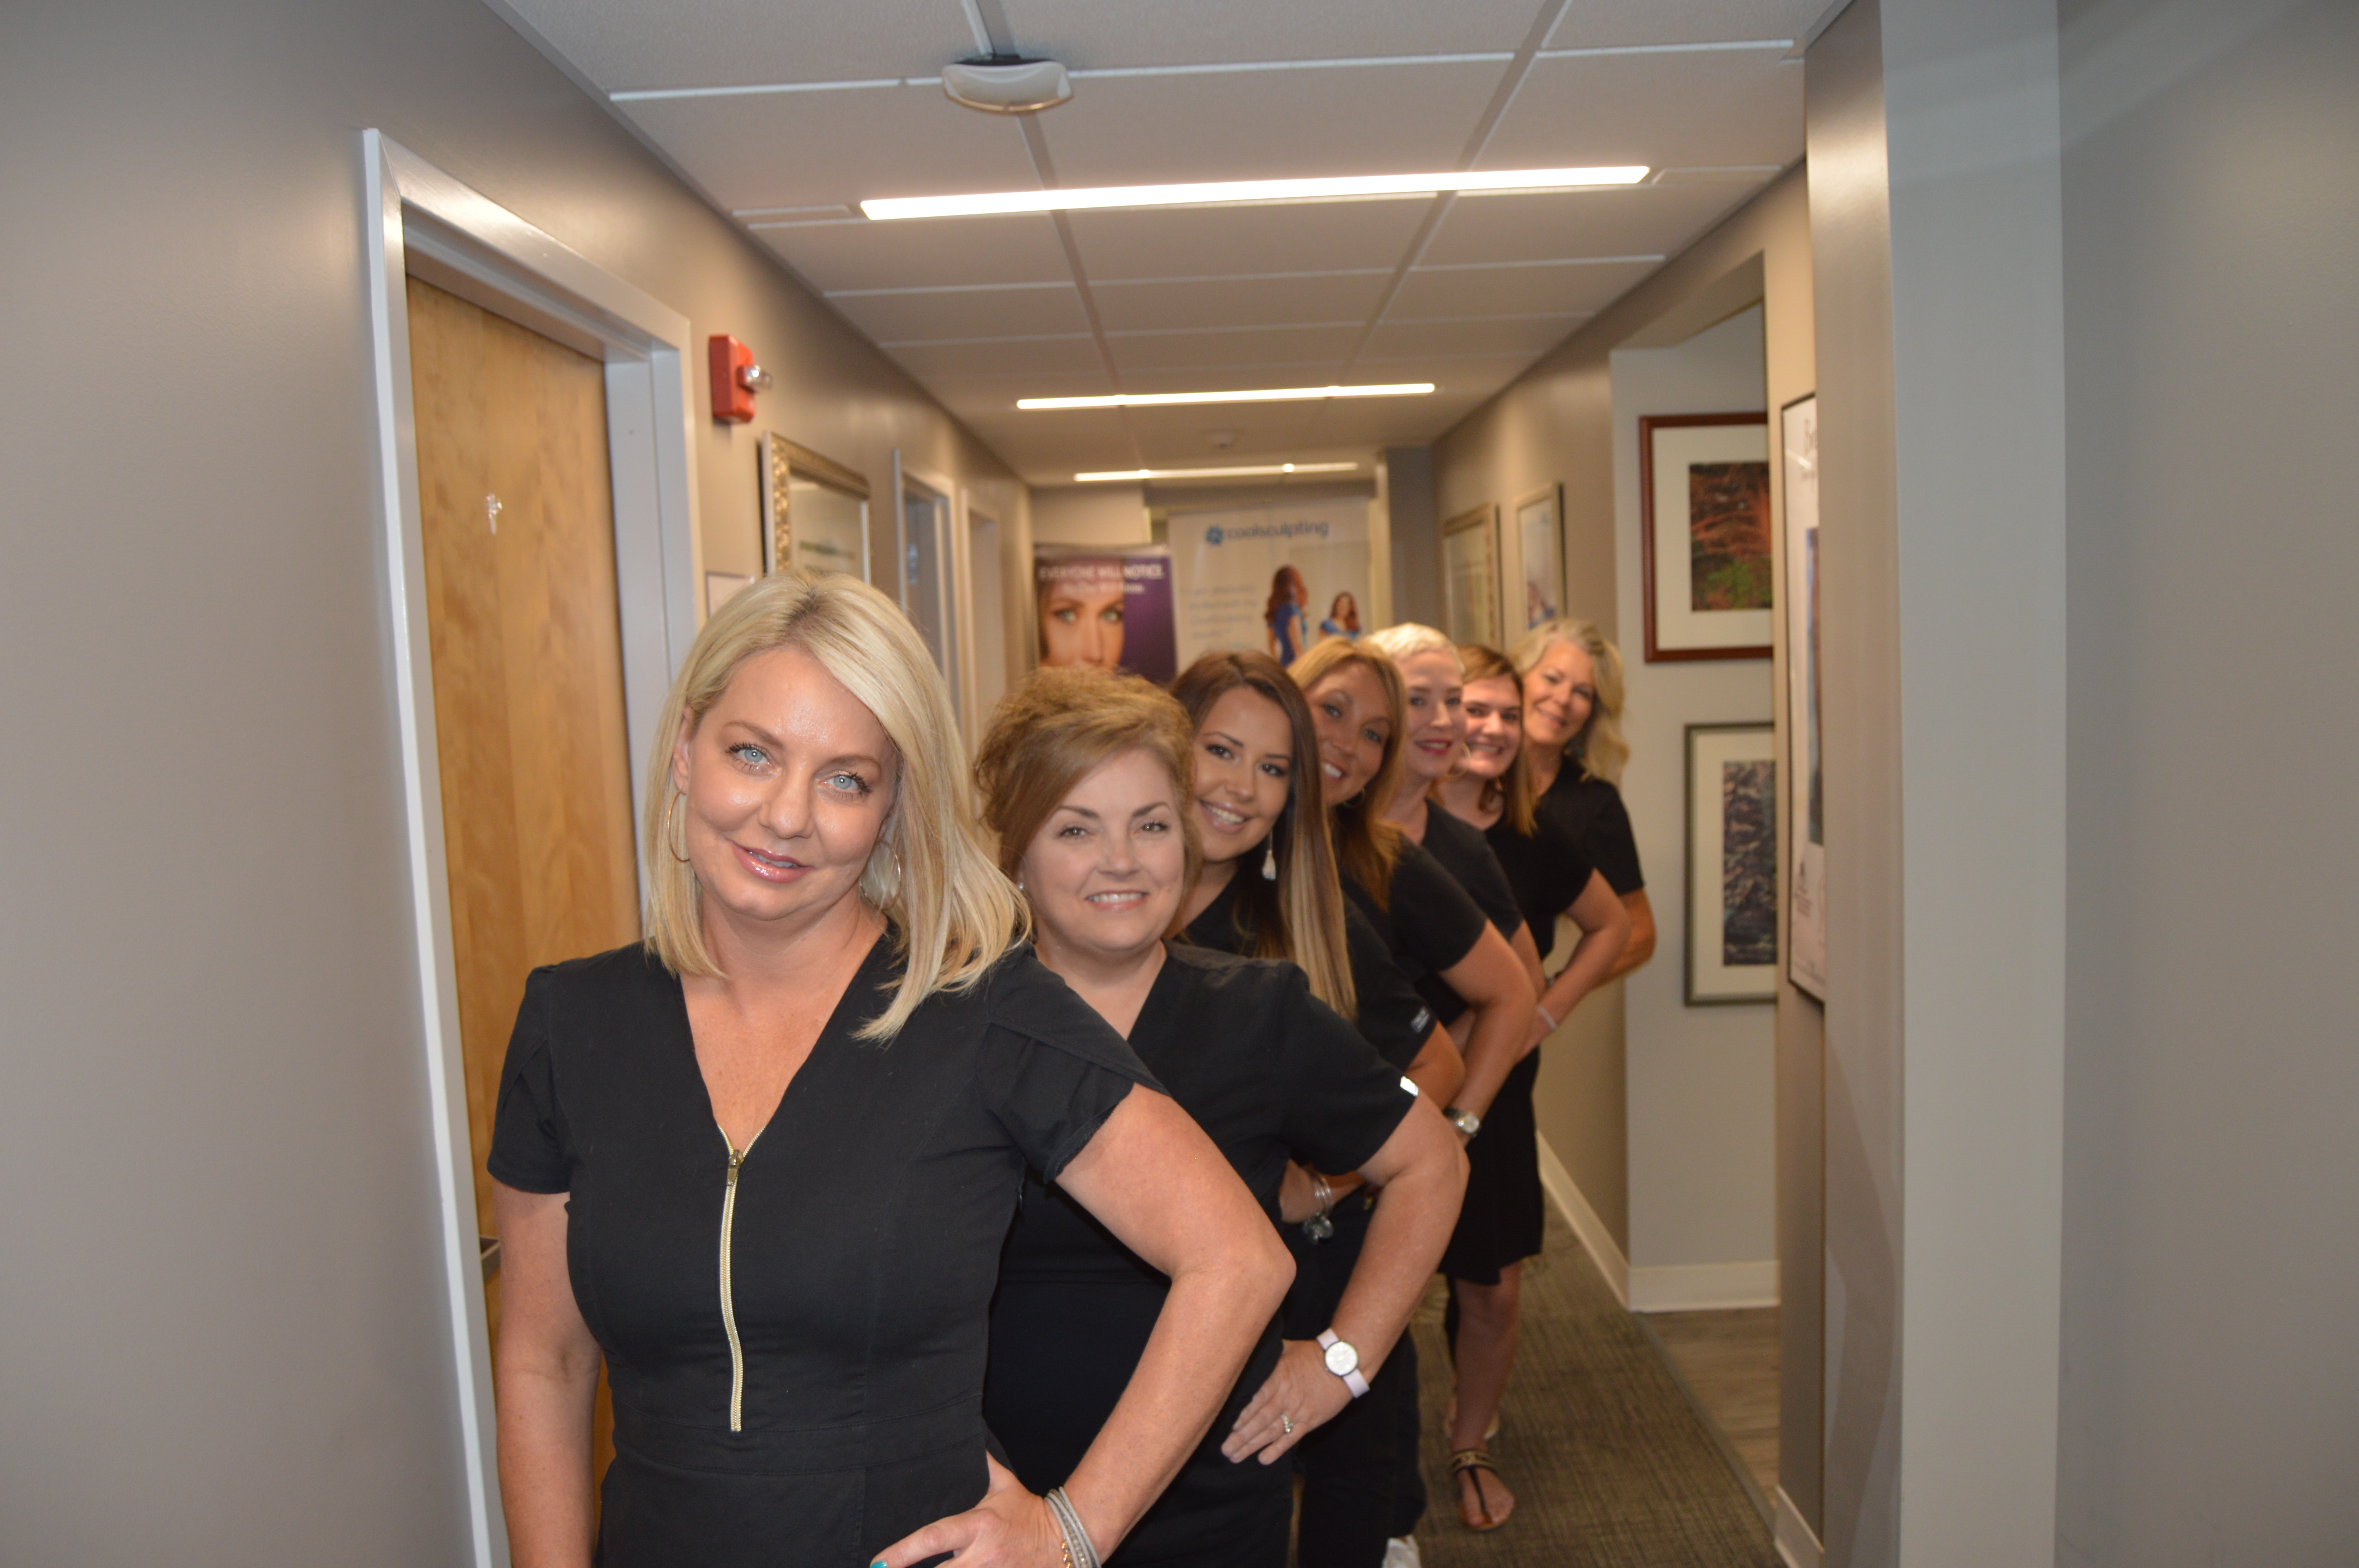 A group of women standing in a hallway.